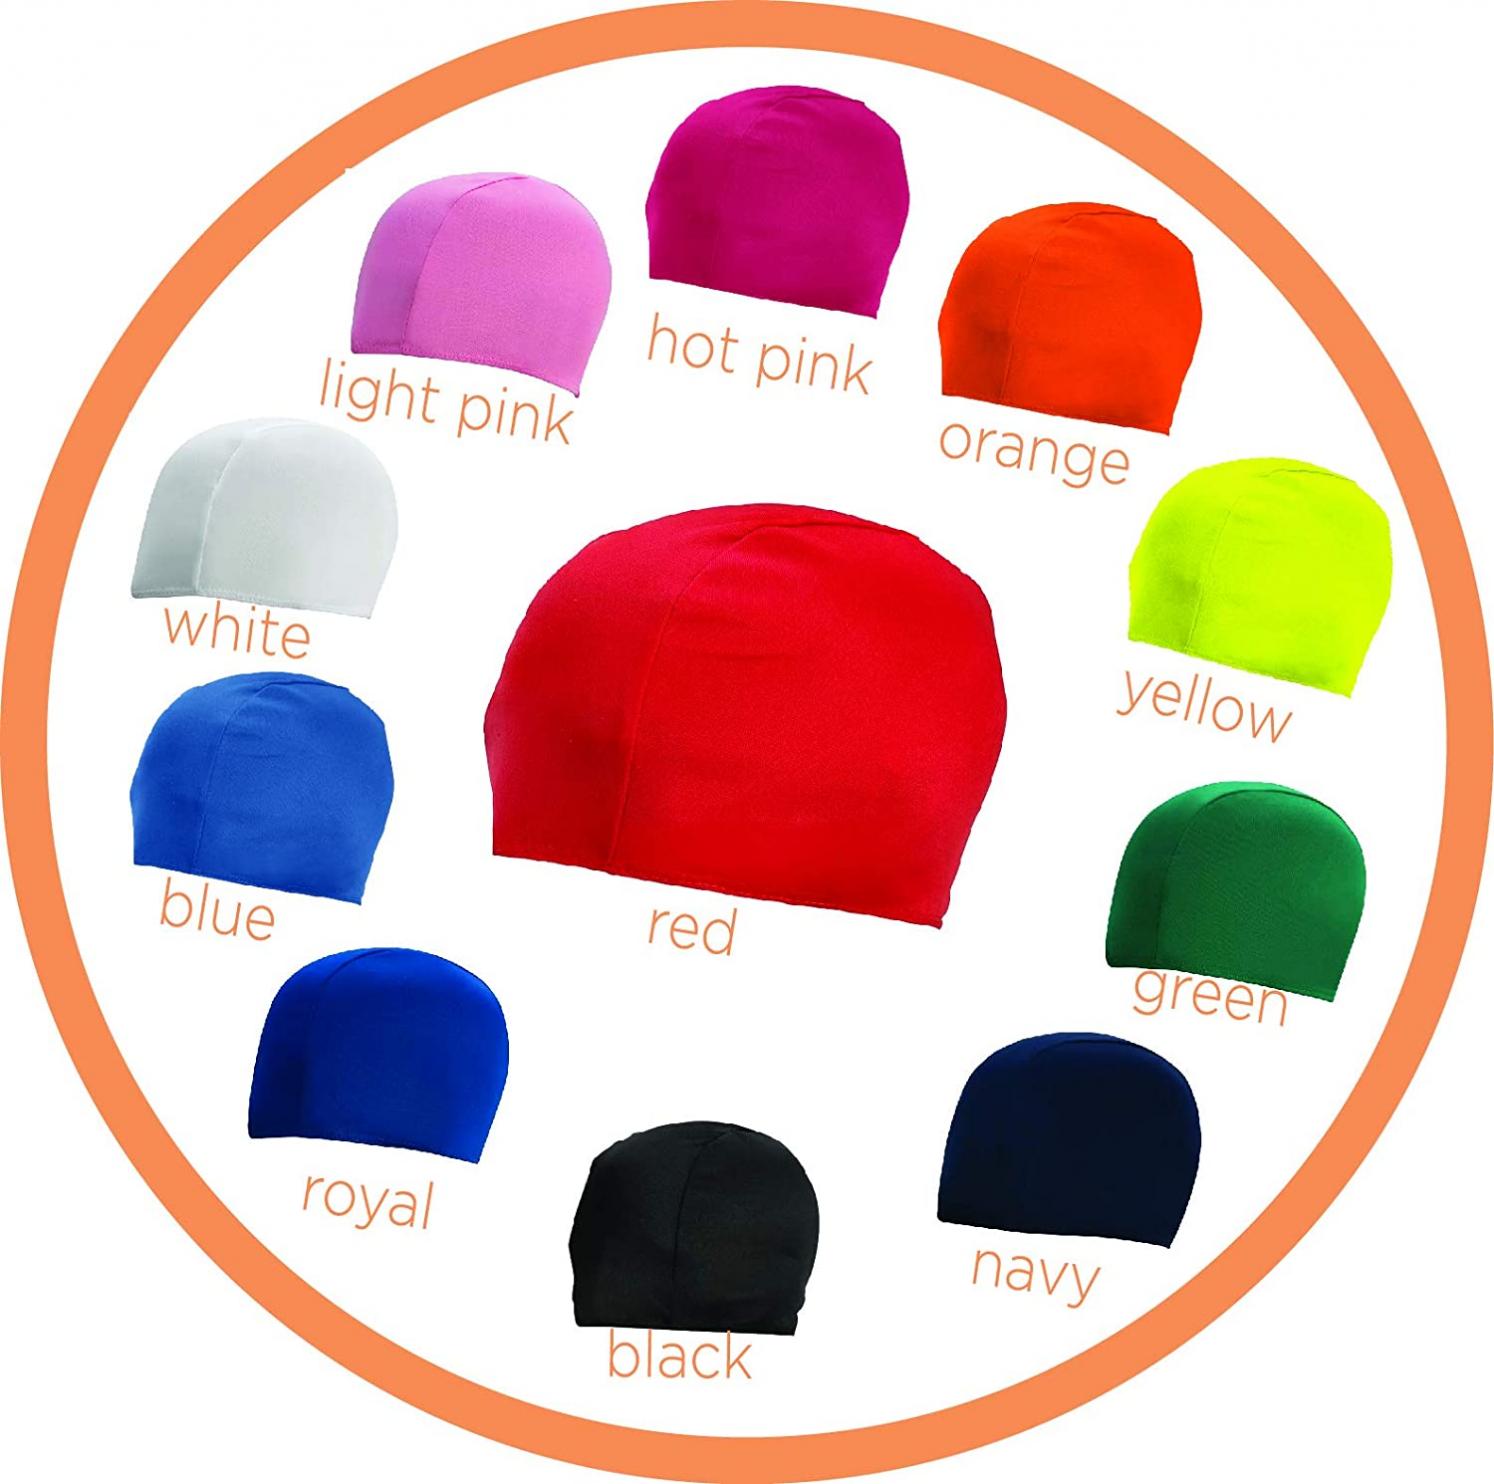 Swim Cap Comfortable Stretch/Spandex - Kids/Adults - Fits Kids with All Hair Length and Adult Short Hair